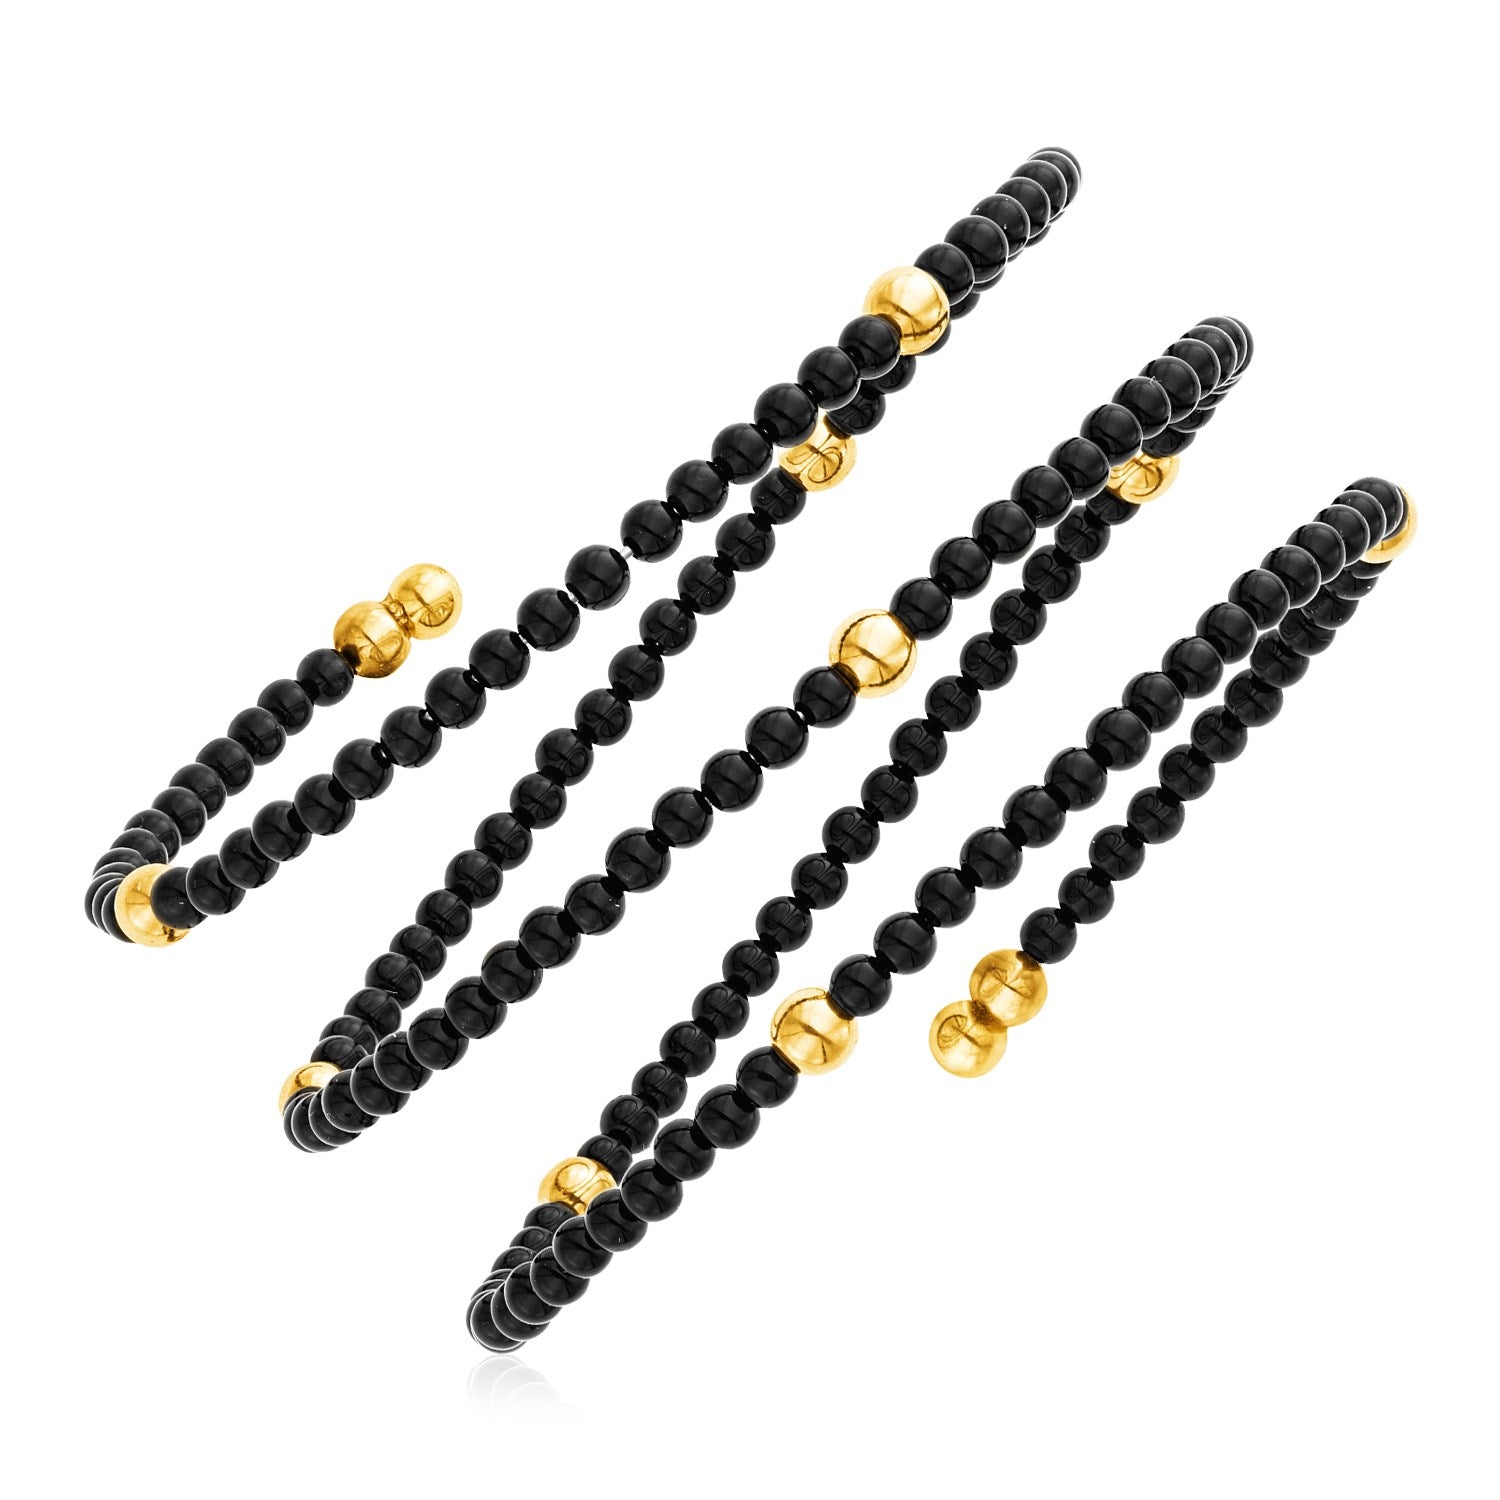 14k Yellow Gold Wrap Around Bangle with Black Onyx and Polished Beads